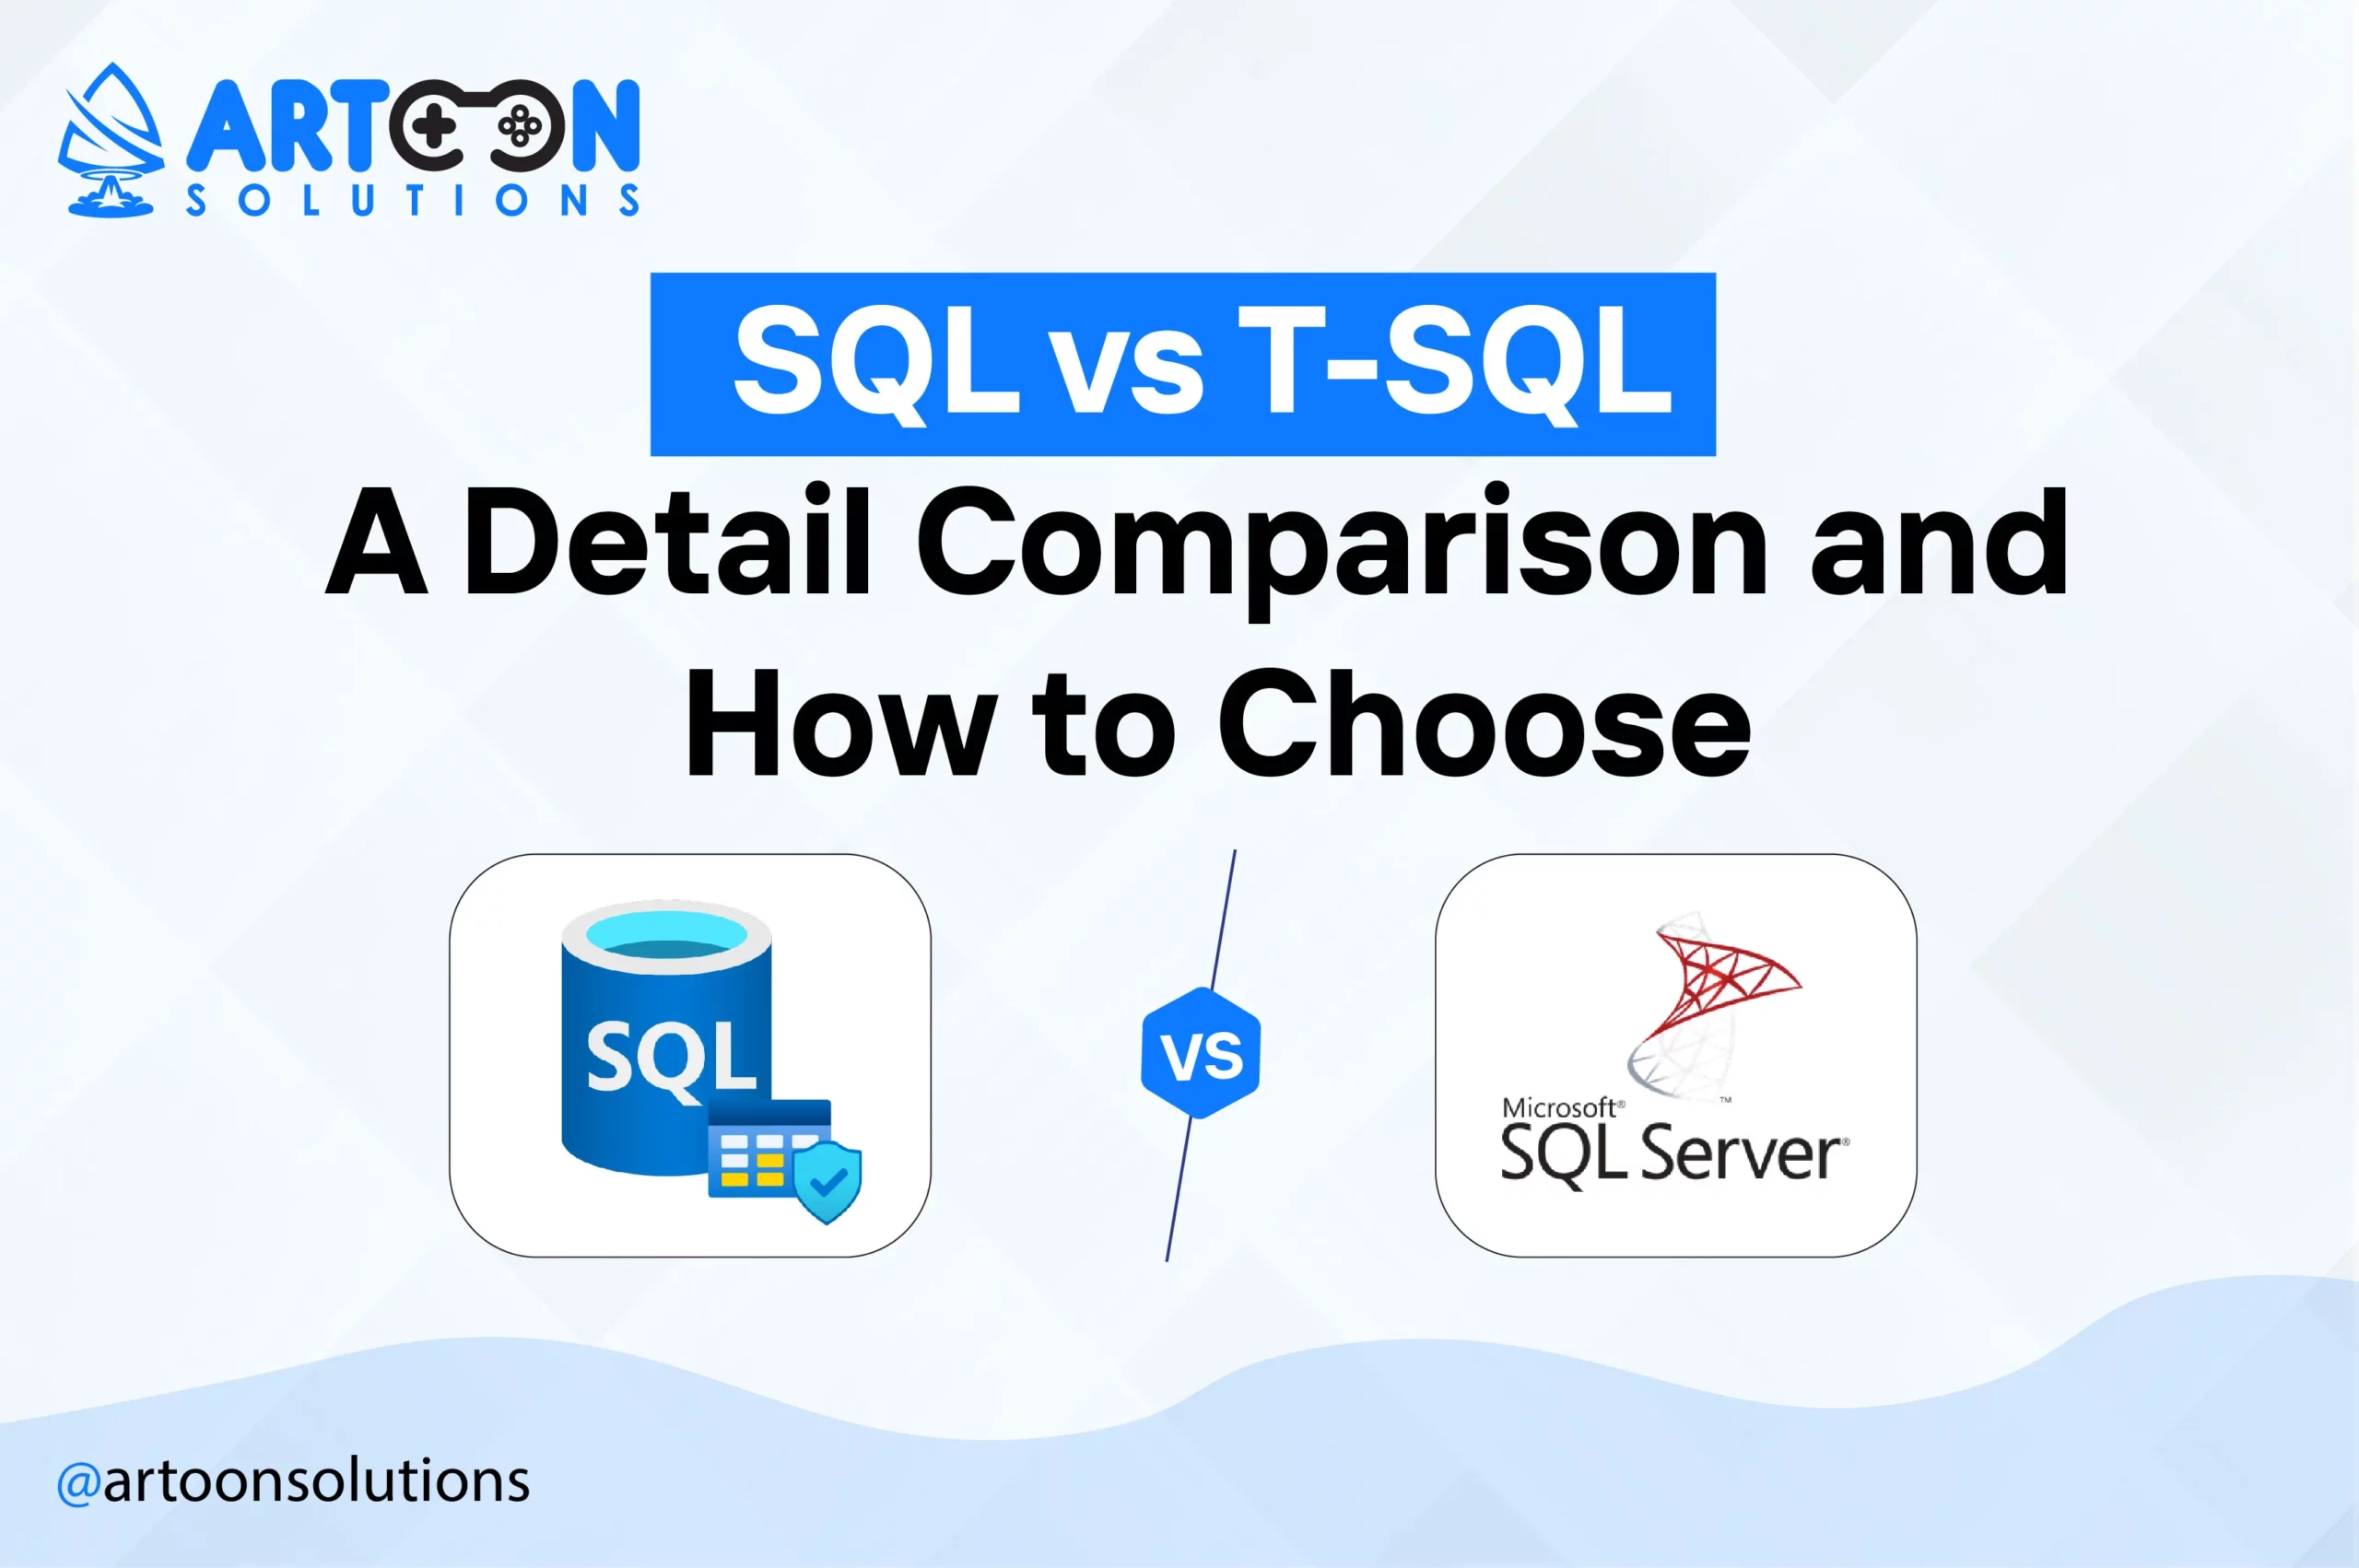 SQL vs T-SQL A Detail Comparison and How to Choose